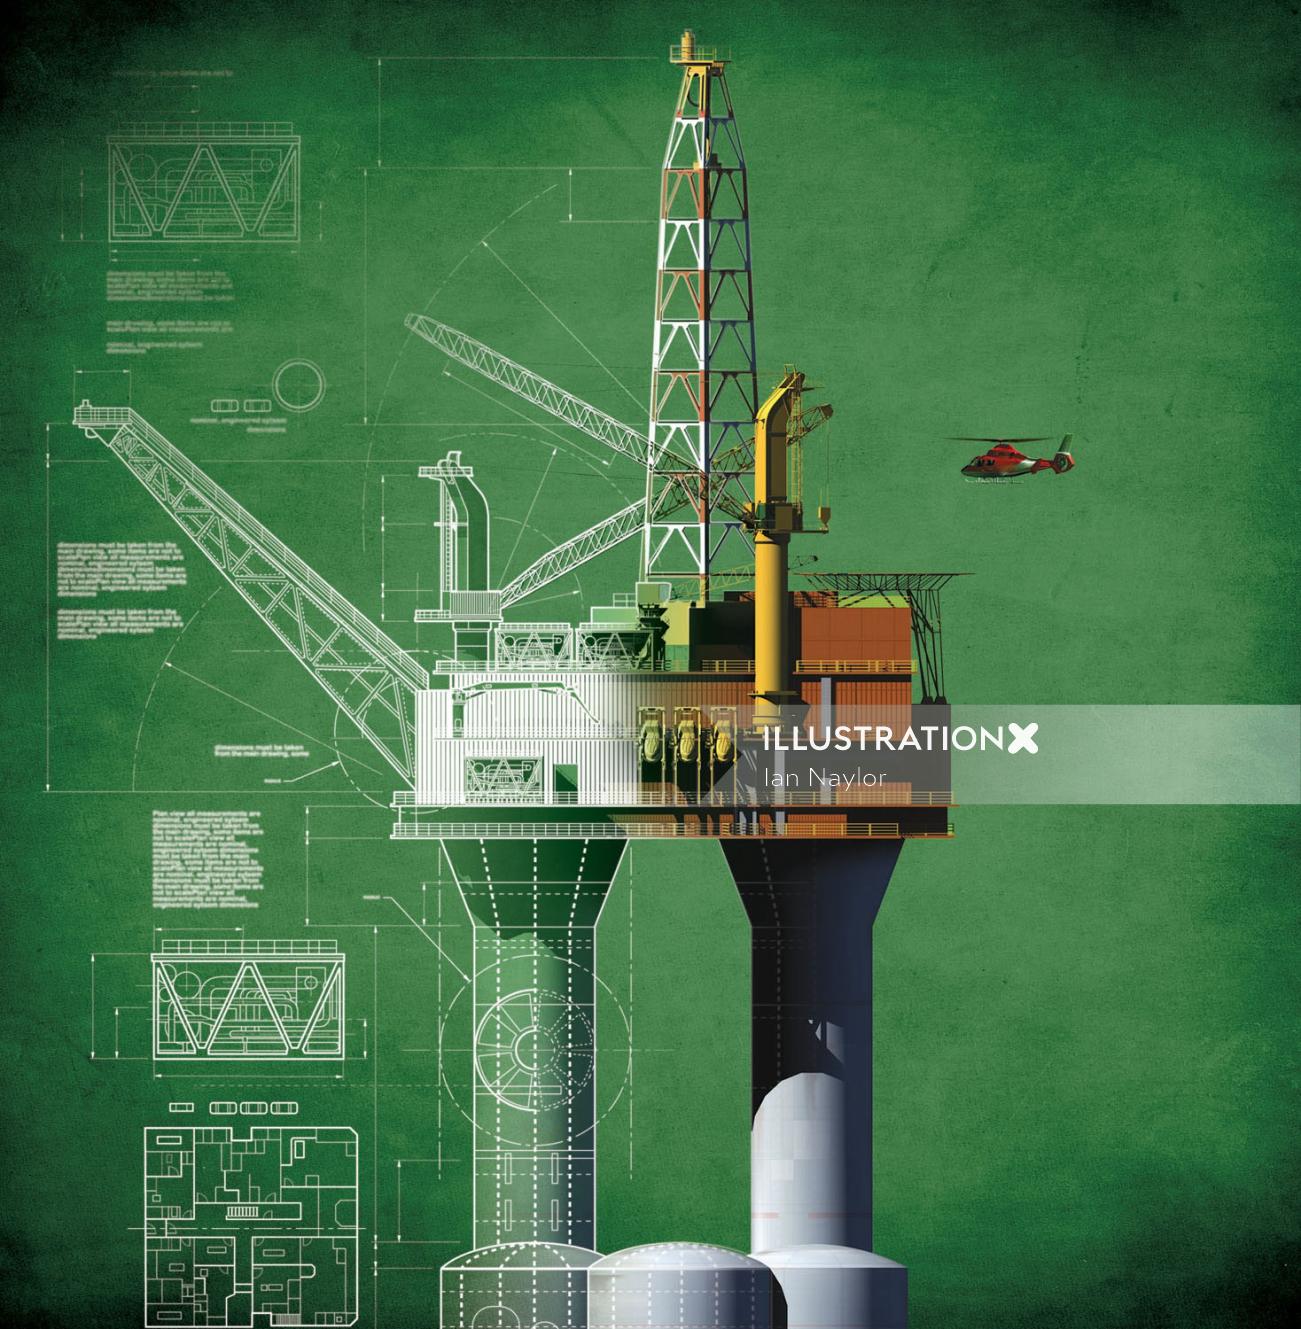 Rig illustration by Ian Naylor